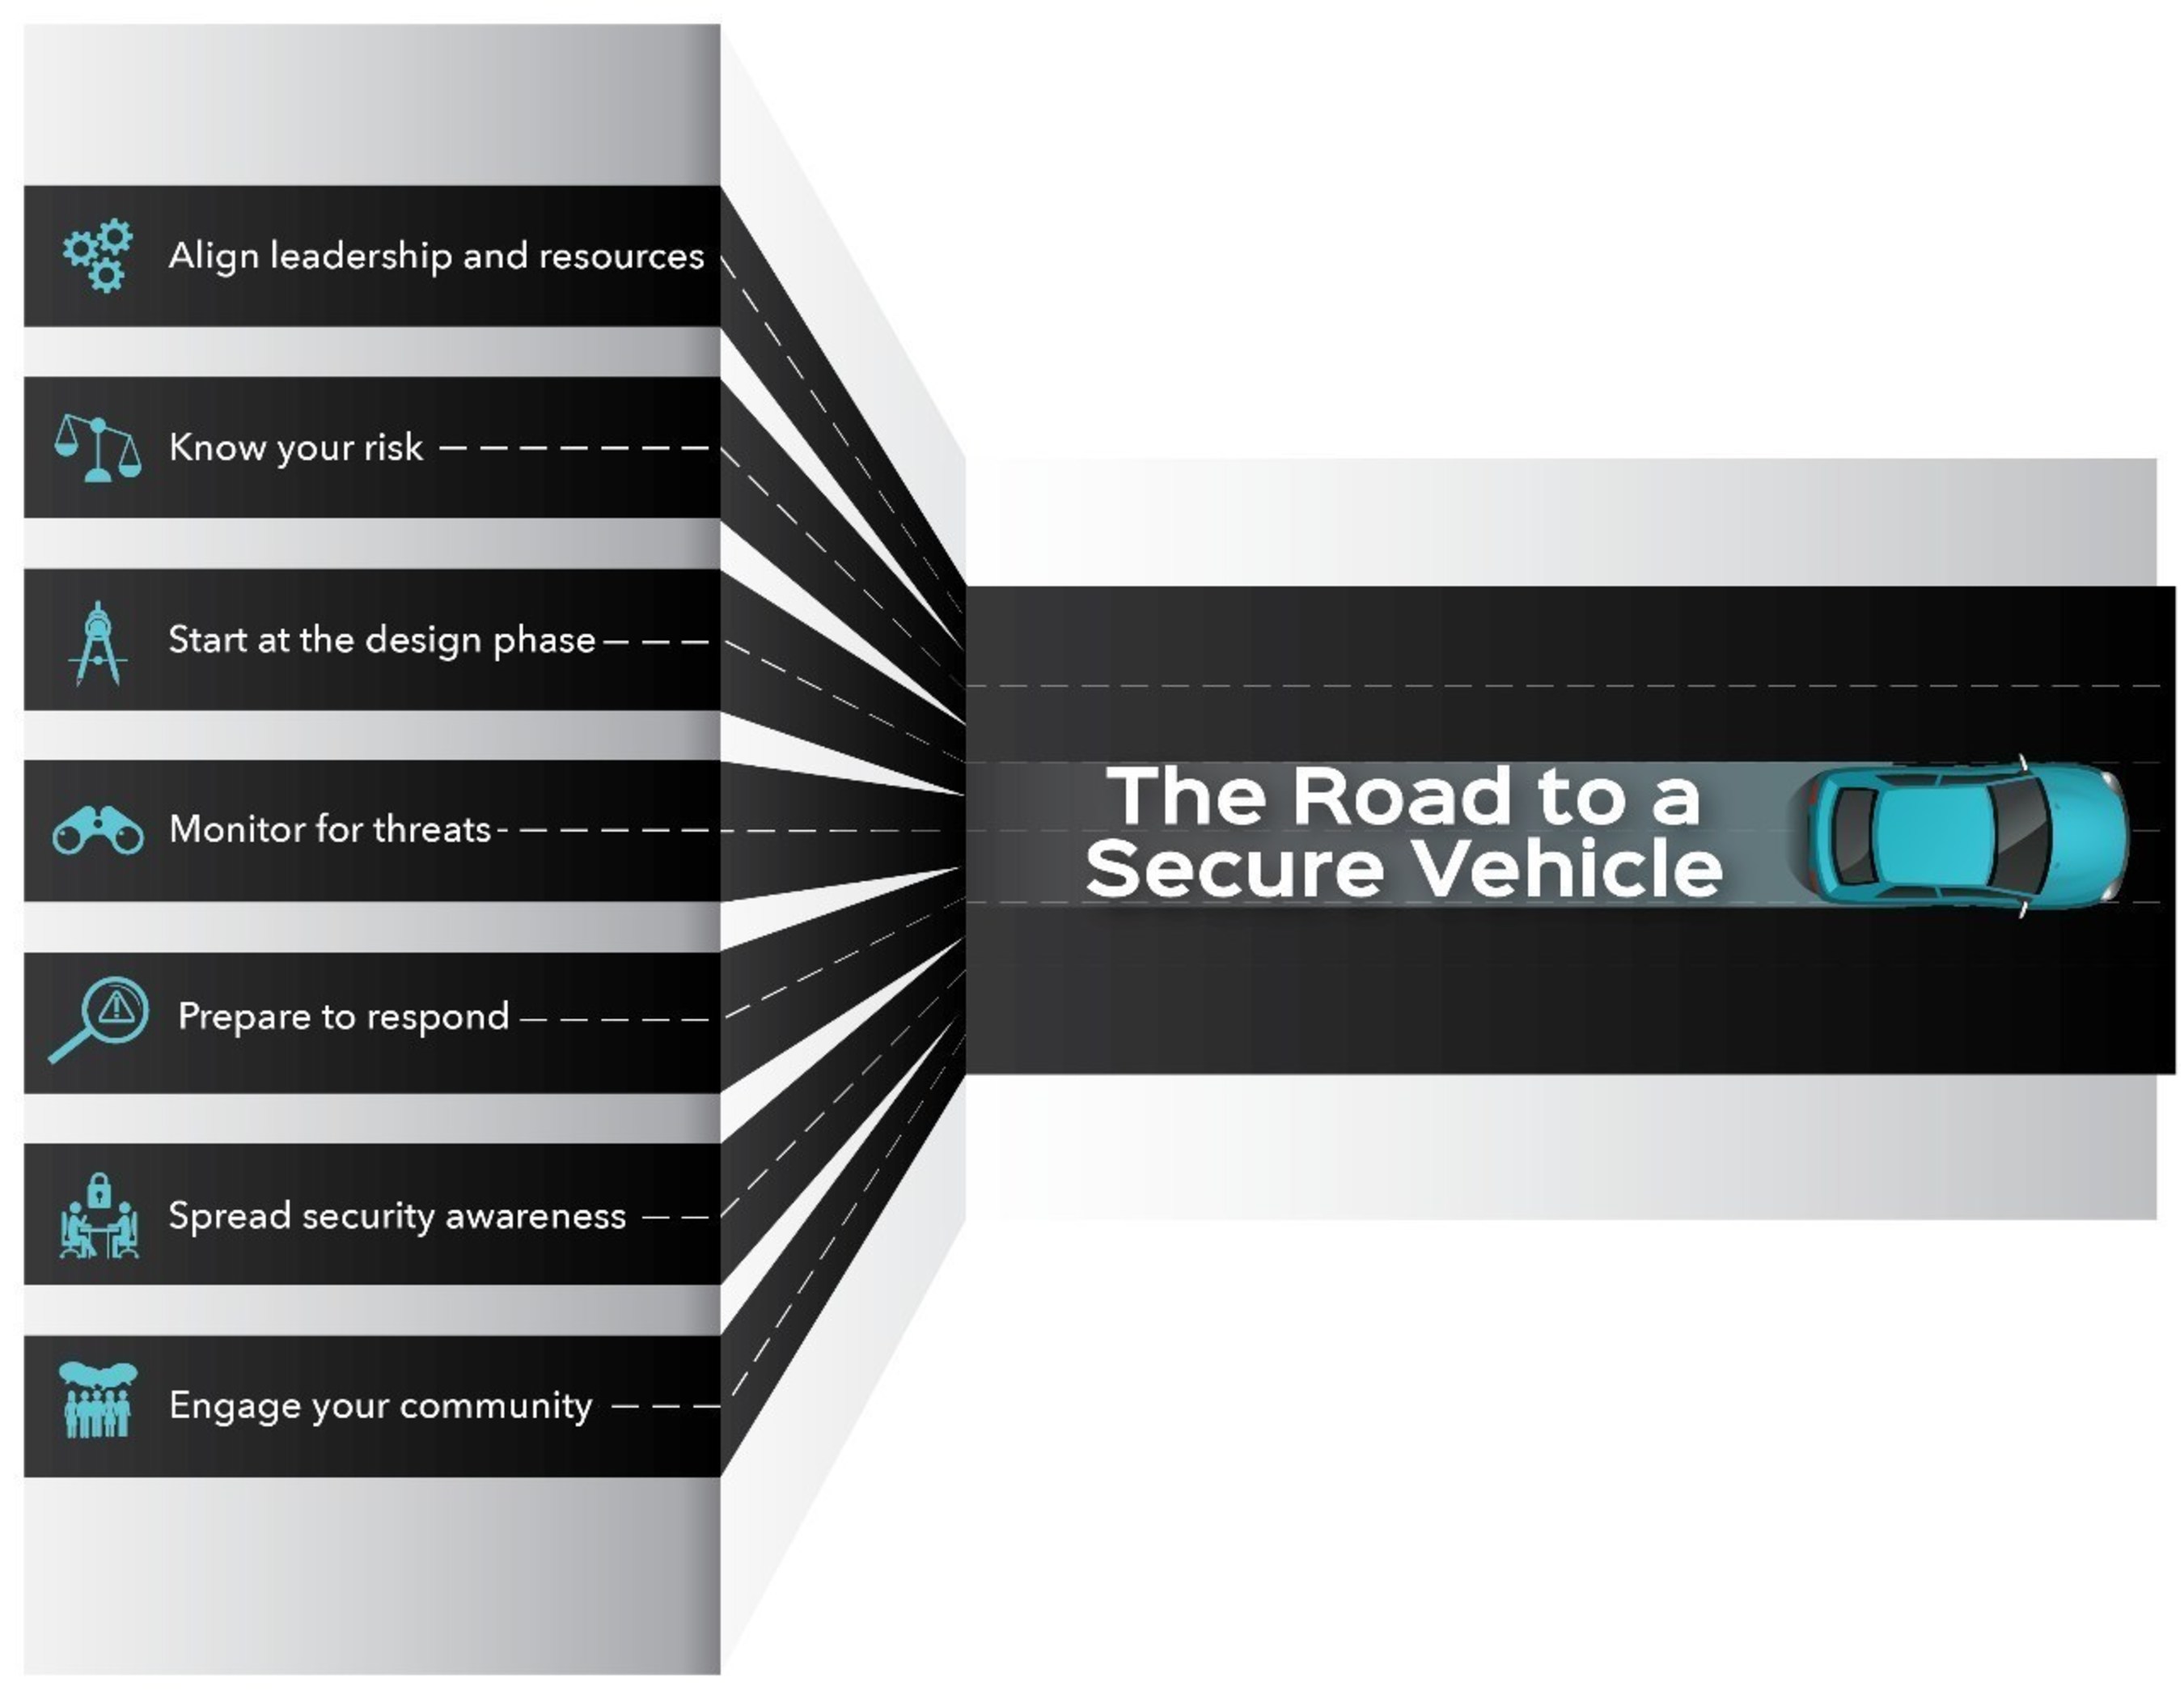 Vehicle Cybersecurity Best Practices - The Road to a Secure Vehicle